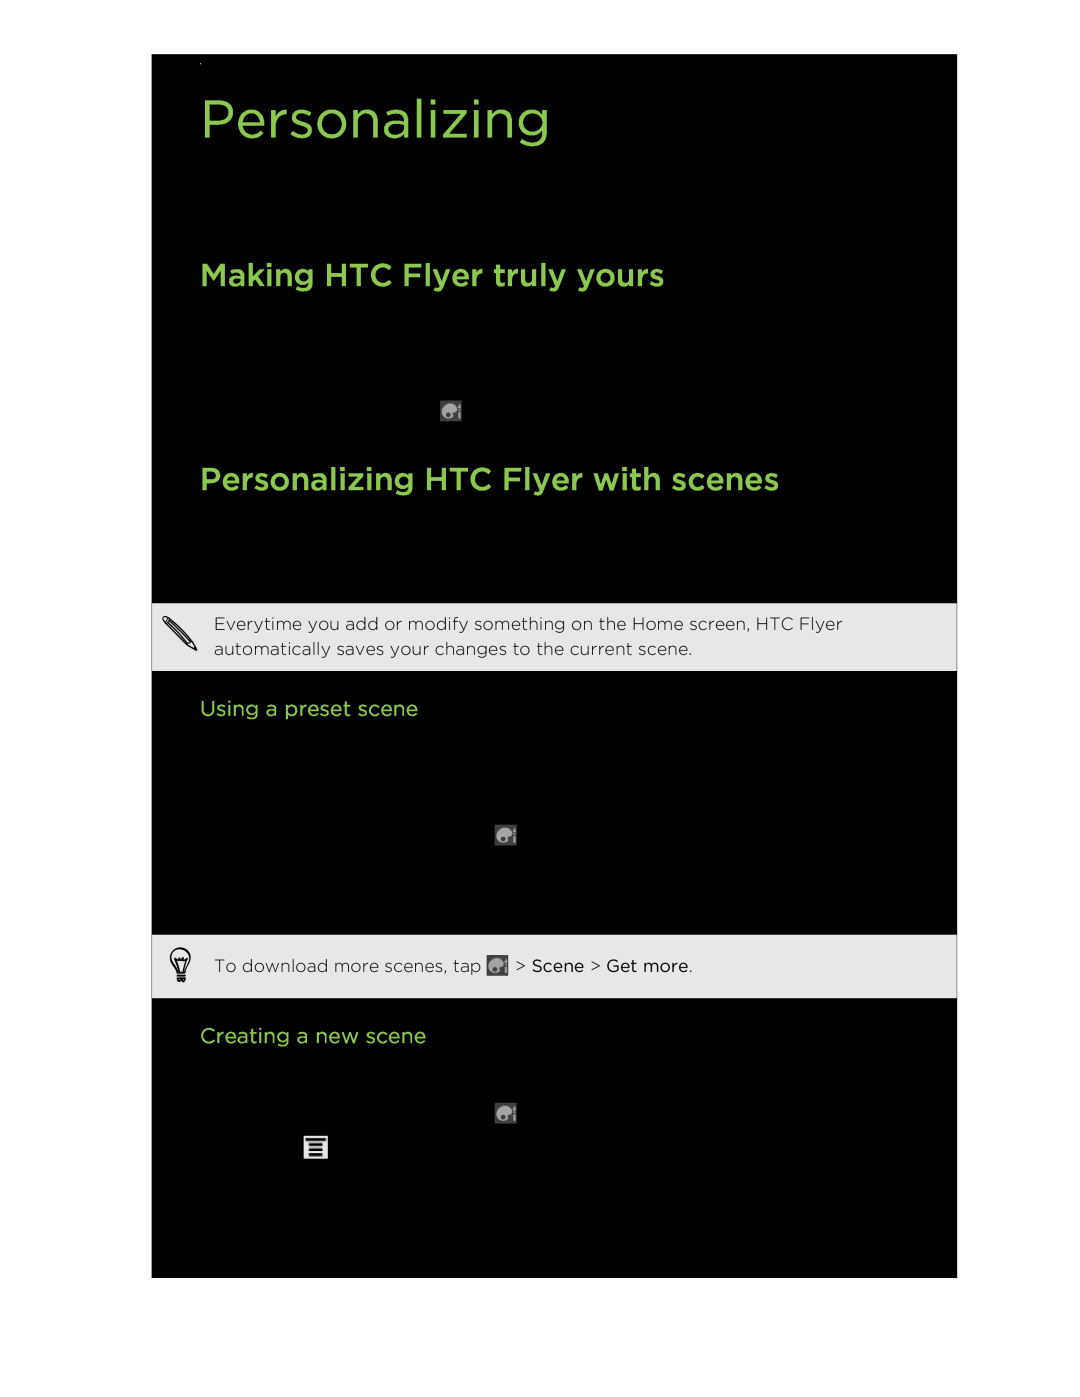 HTC HTCFlyerP512 manual Making HTC Flyer truly yours, Personalizing HTC Flyer with scenes, Using a preset scene 